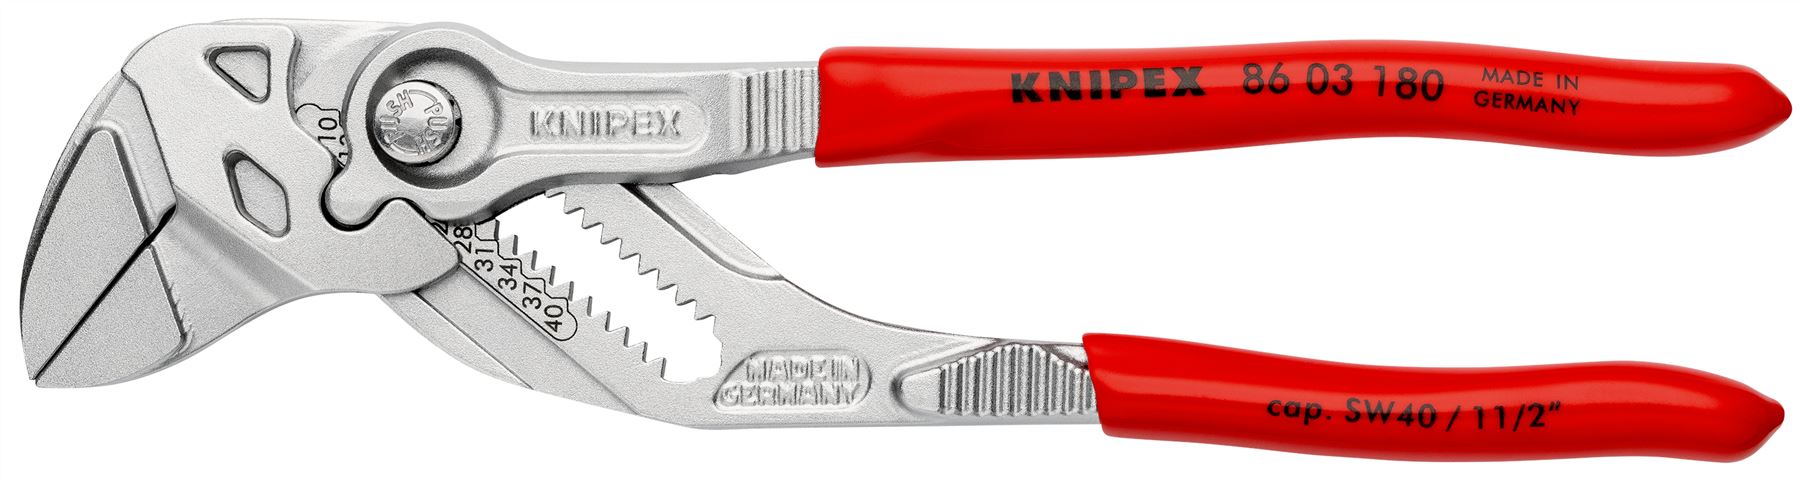 KNIPEX Pliers Wrench Adjustable Grips Push Button 100-400 mm Choose Size